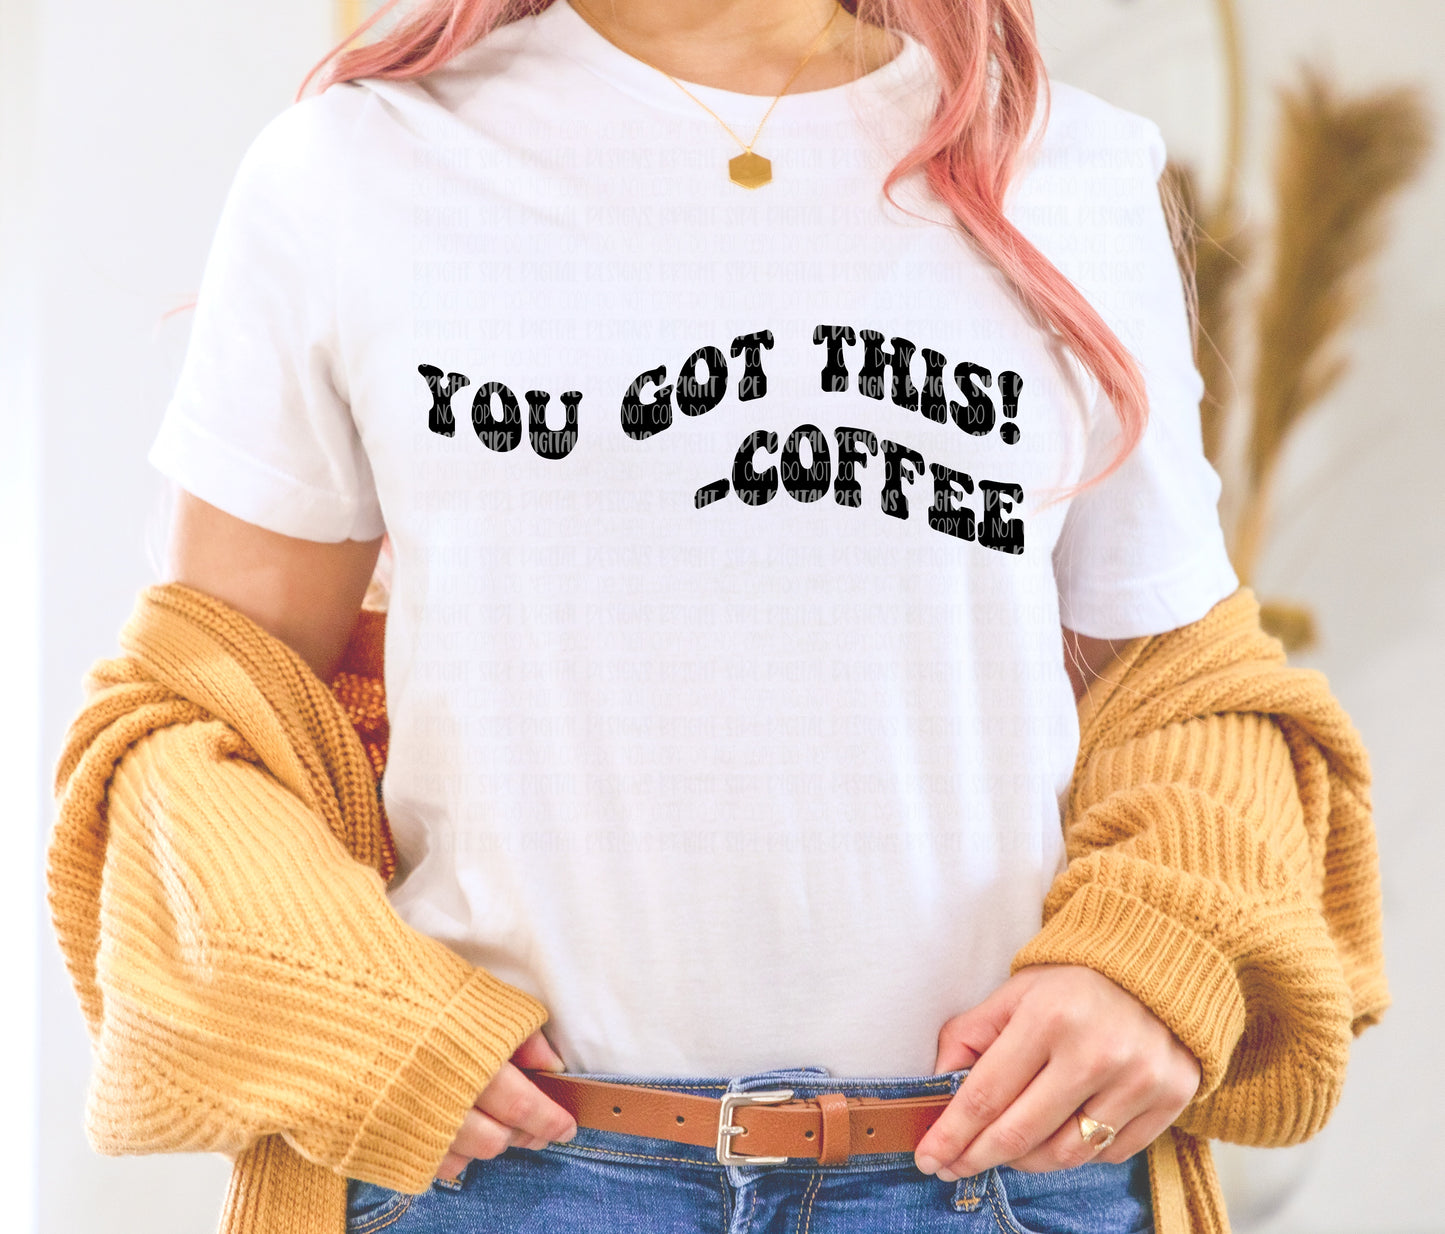 You got this -coffee